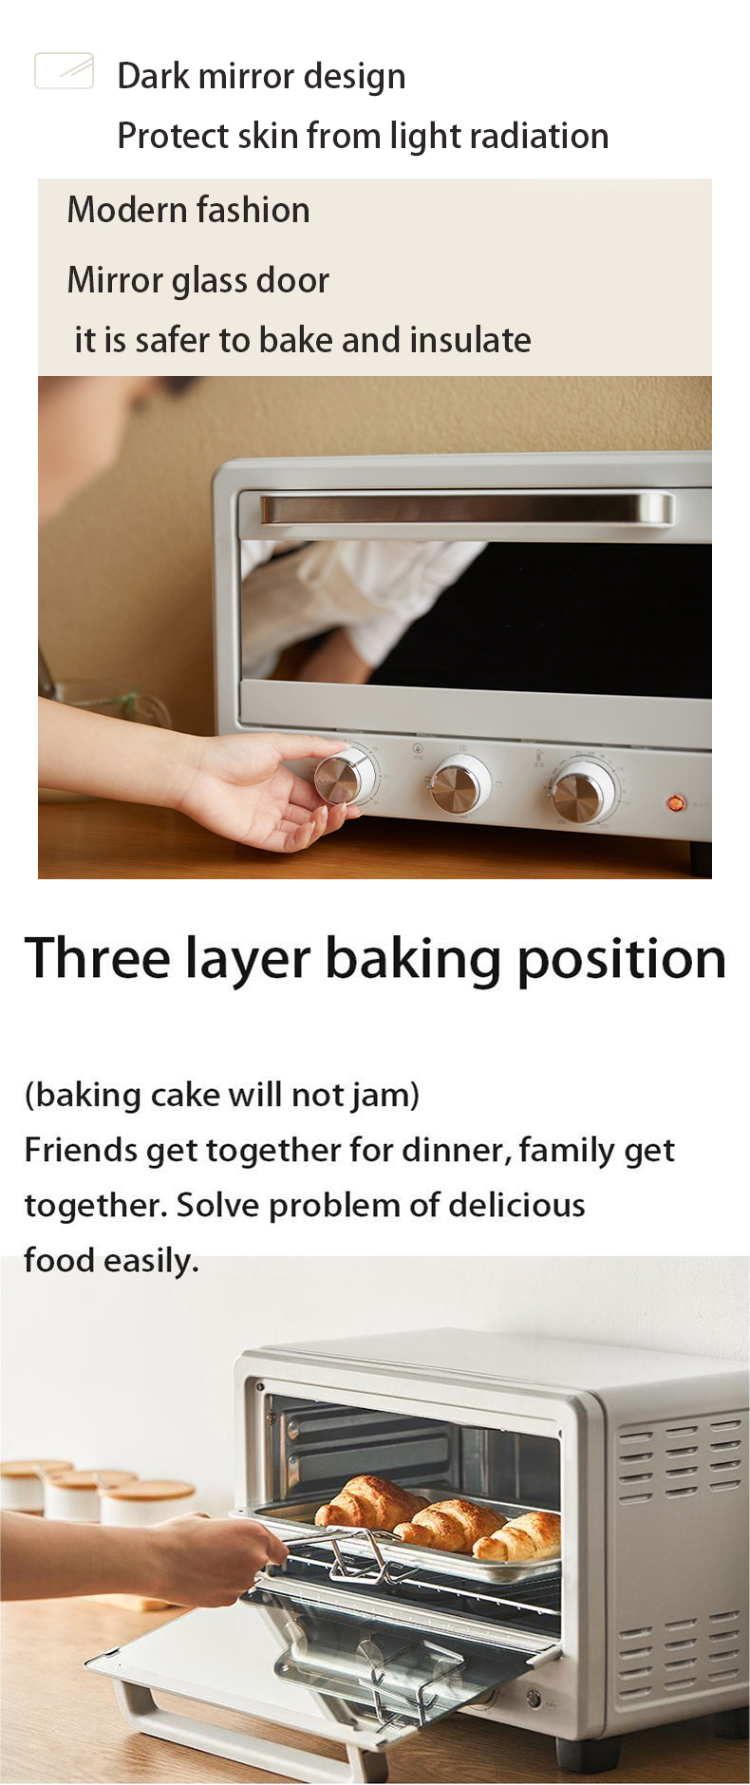 Portable Oven Manufacturers